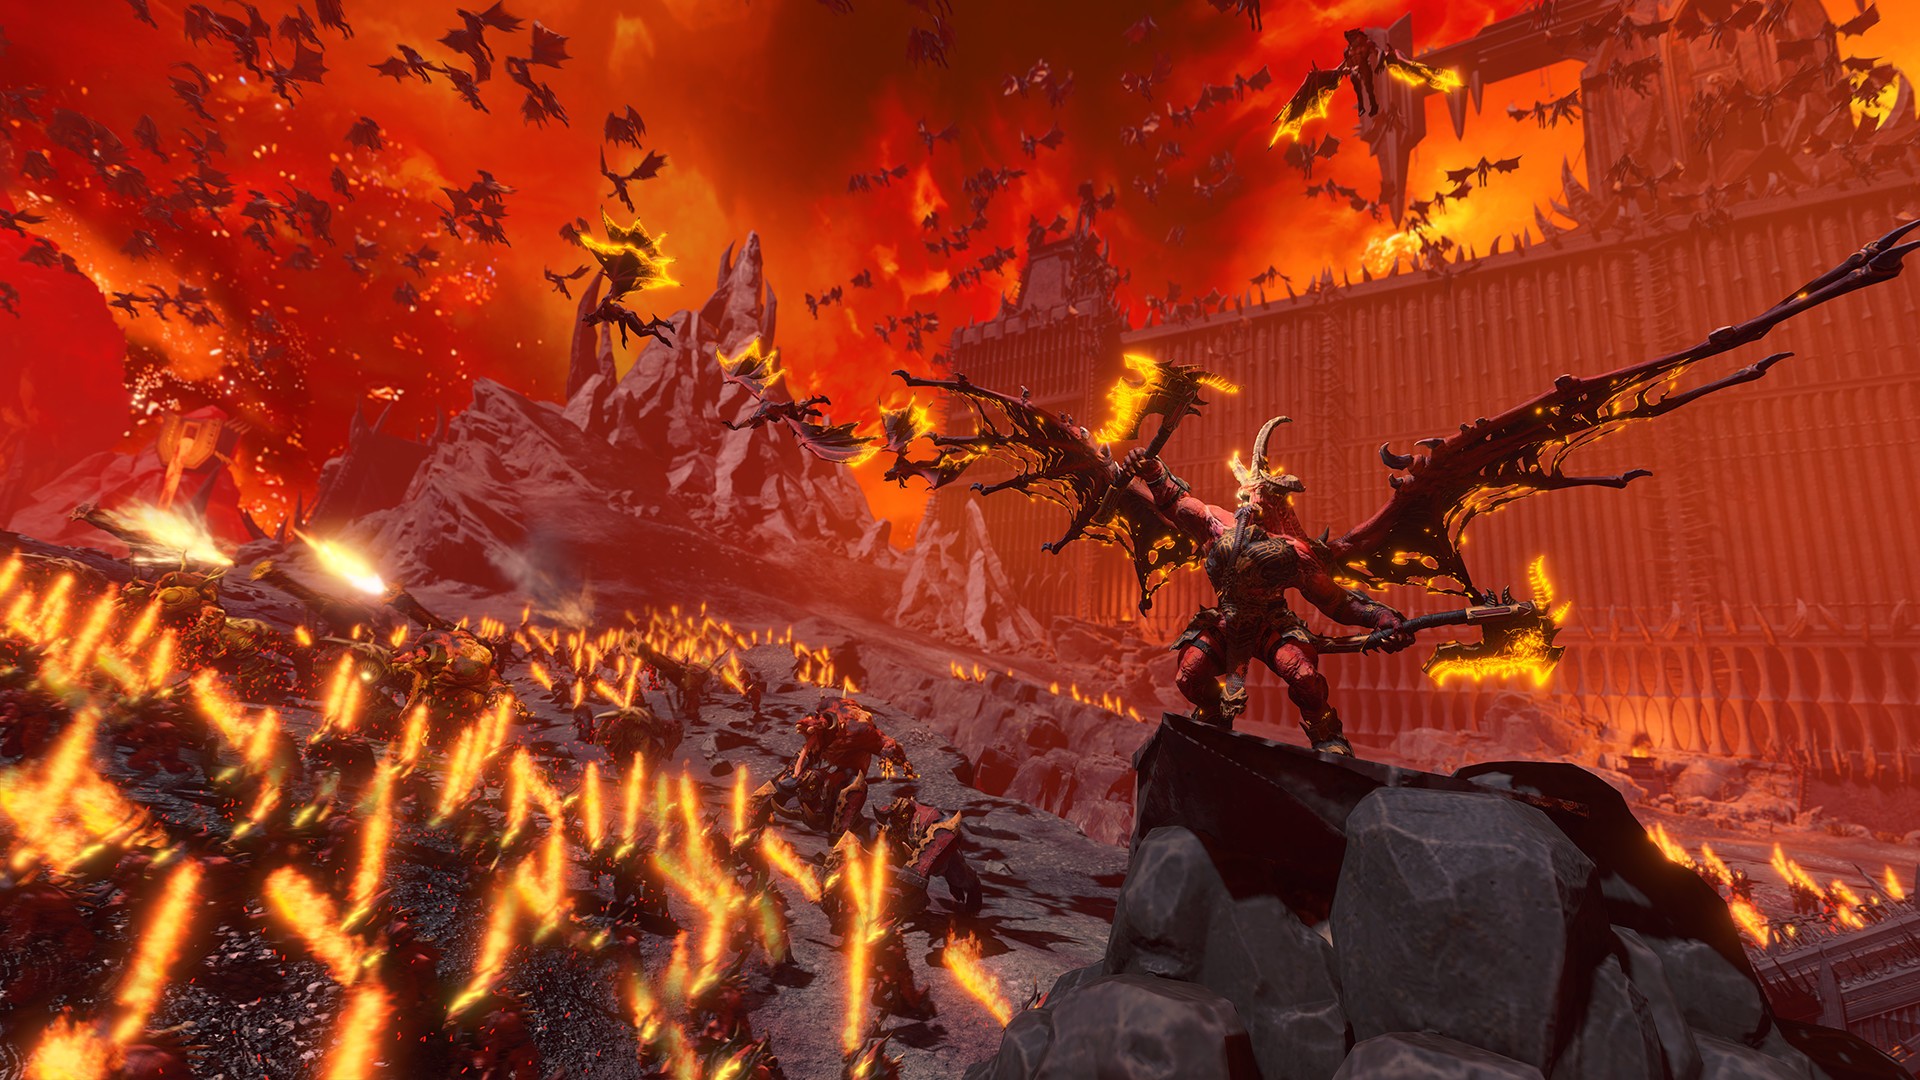 Total War Warhammer 3 DLC price increase: A fiery battlefield from Creative Assembly strategy game Total War Warhammer 3